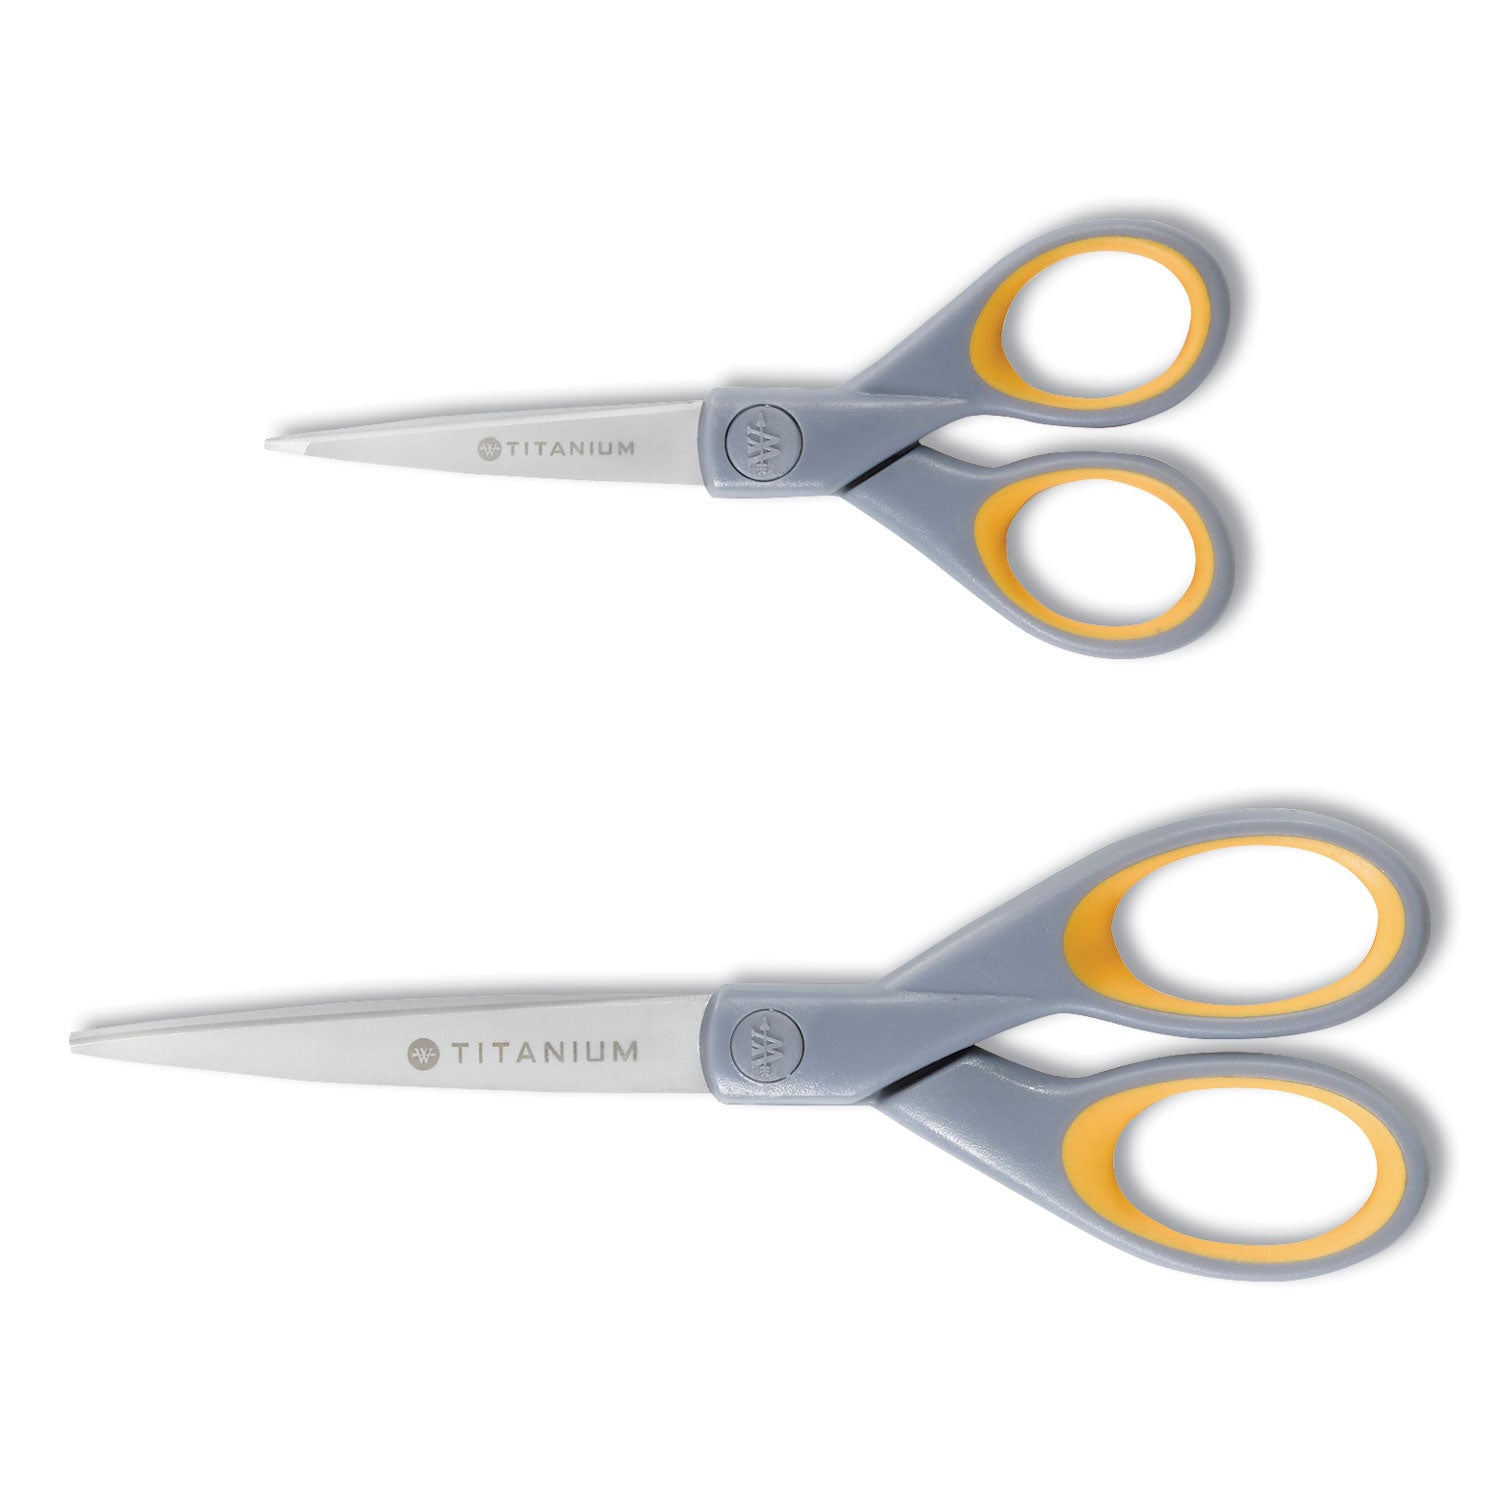 Titanium Bonded Scissors, 5" and 7" Long, 2.25" and 3.5" Cut Lengths, Gray/Yellow Straight Handles, 2/Pack - 